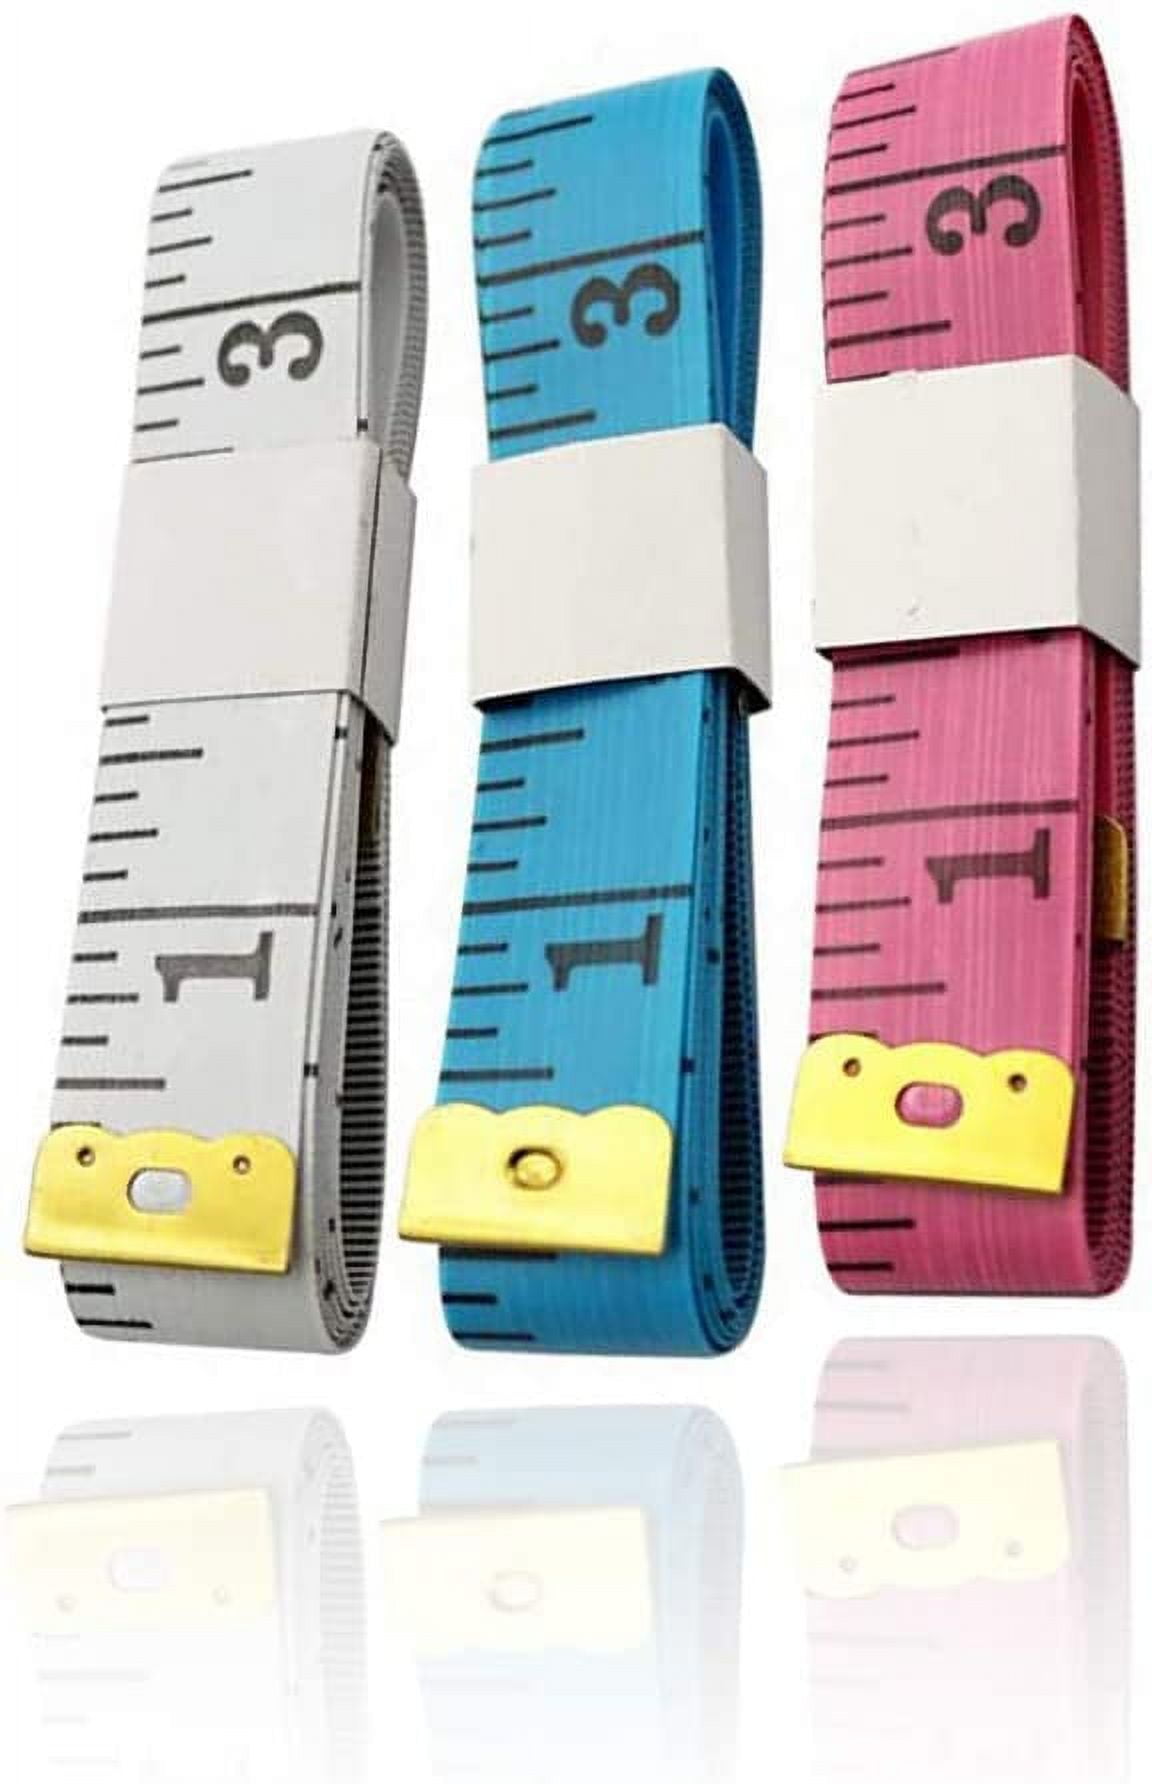 Wovilon Measuring Tape For Body Fabric Sewing Tailor Cloth Knitting Home  Craft Measureme 